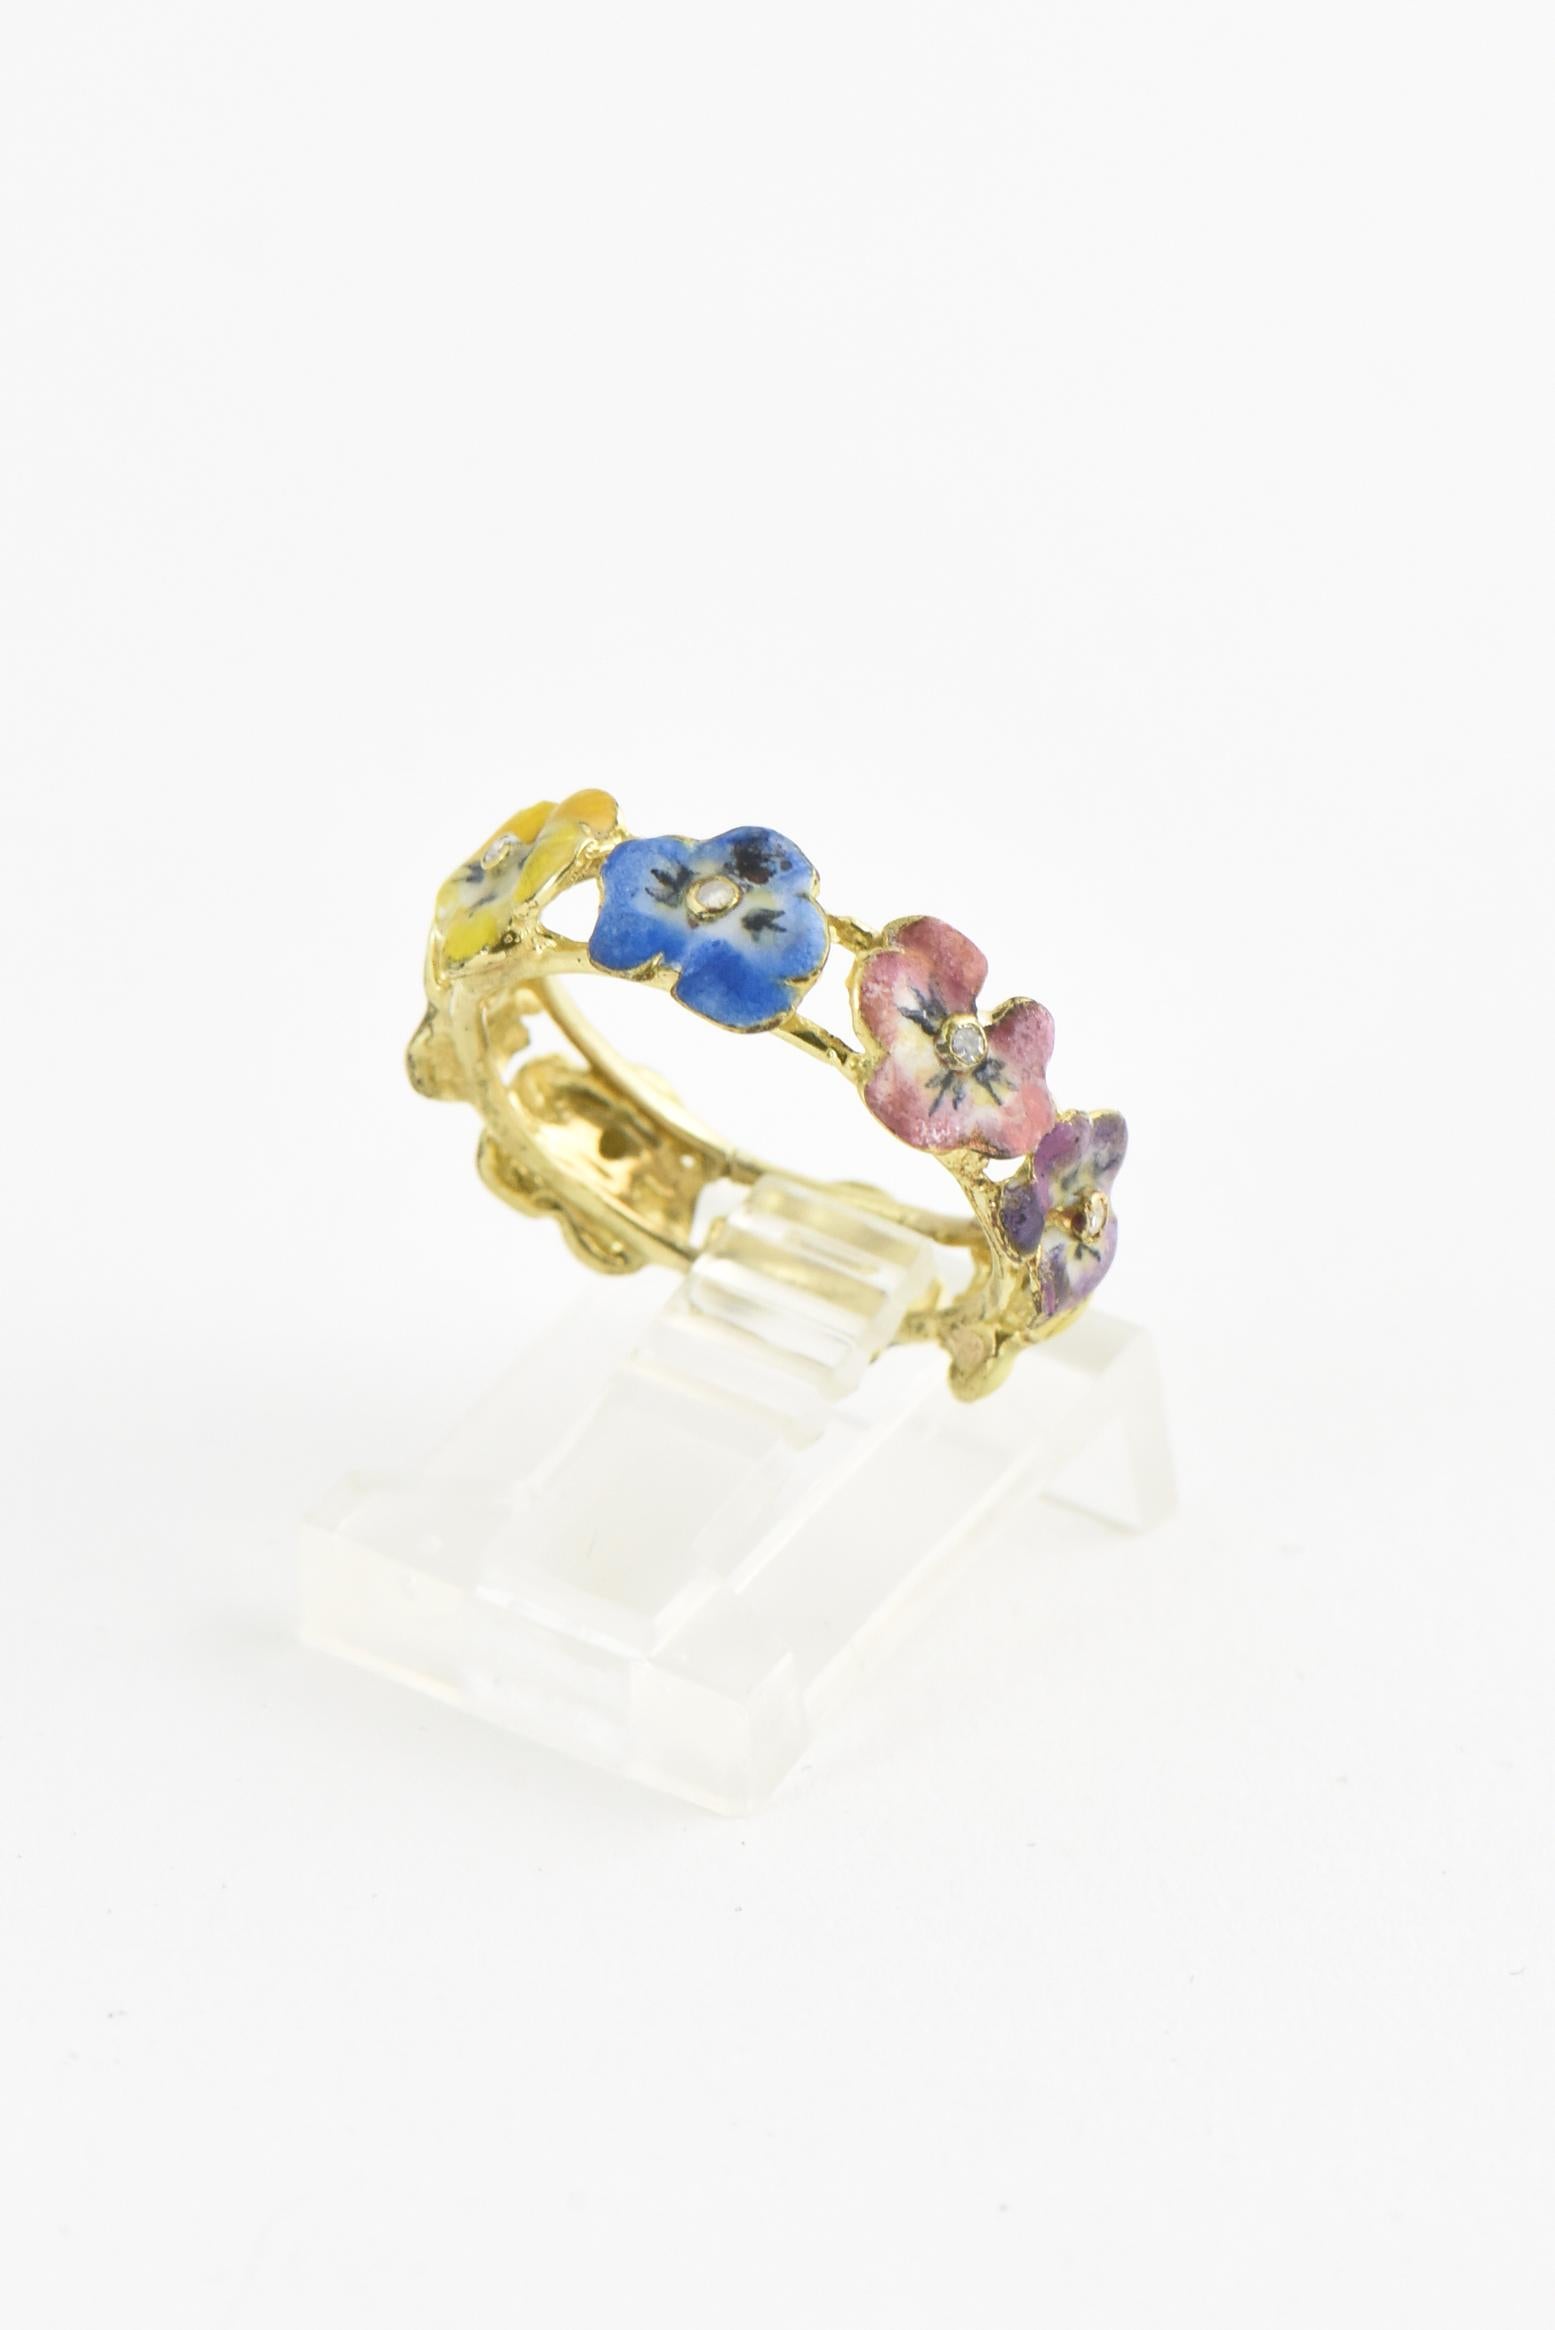 Victorian hand-painted enamel pansy ring with diamond centers and 14K yellow gold band. US size 5.5; cannot be sized. Enamel is fragile and can chip; keep away from chemicals. Age wear.